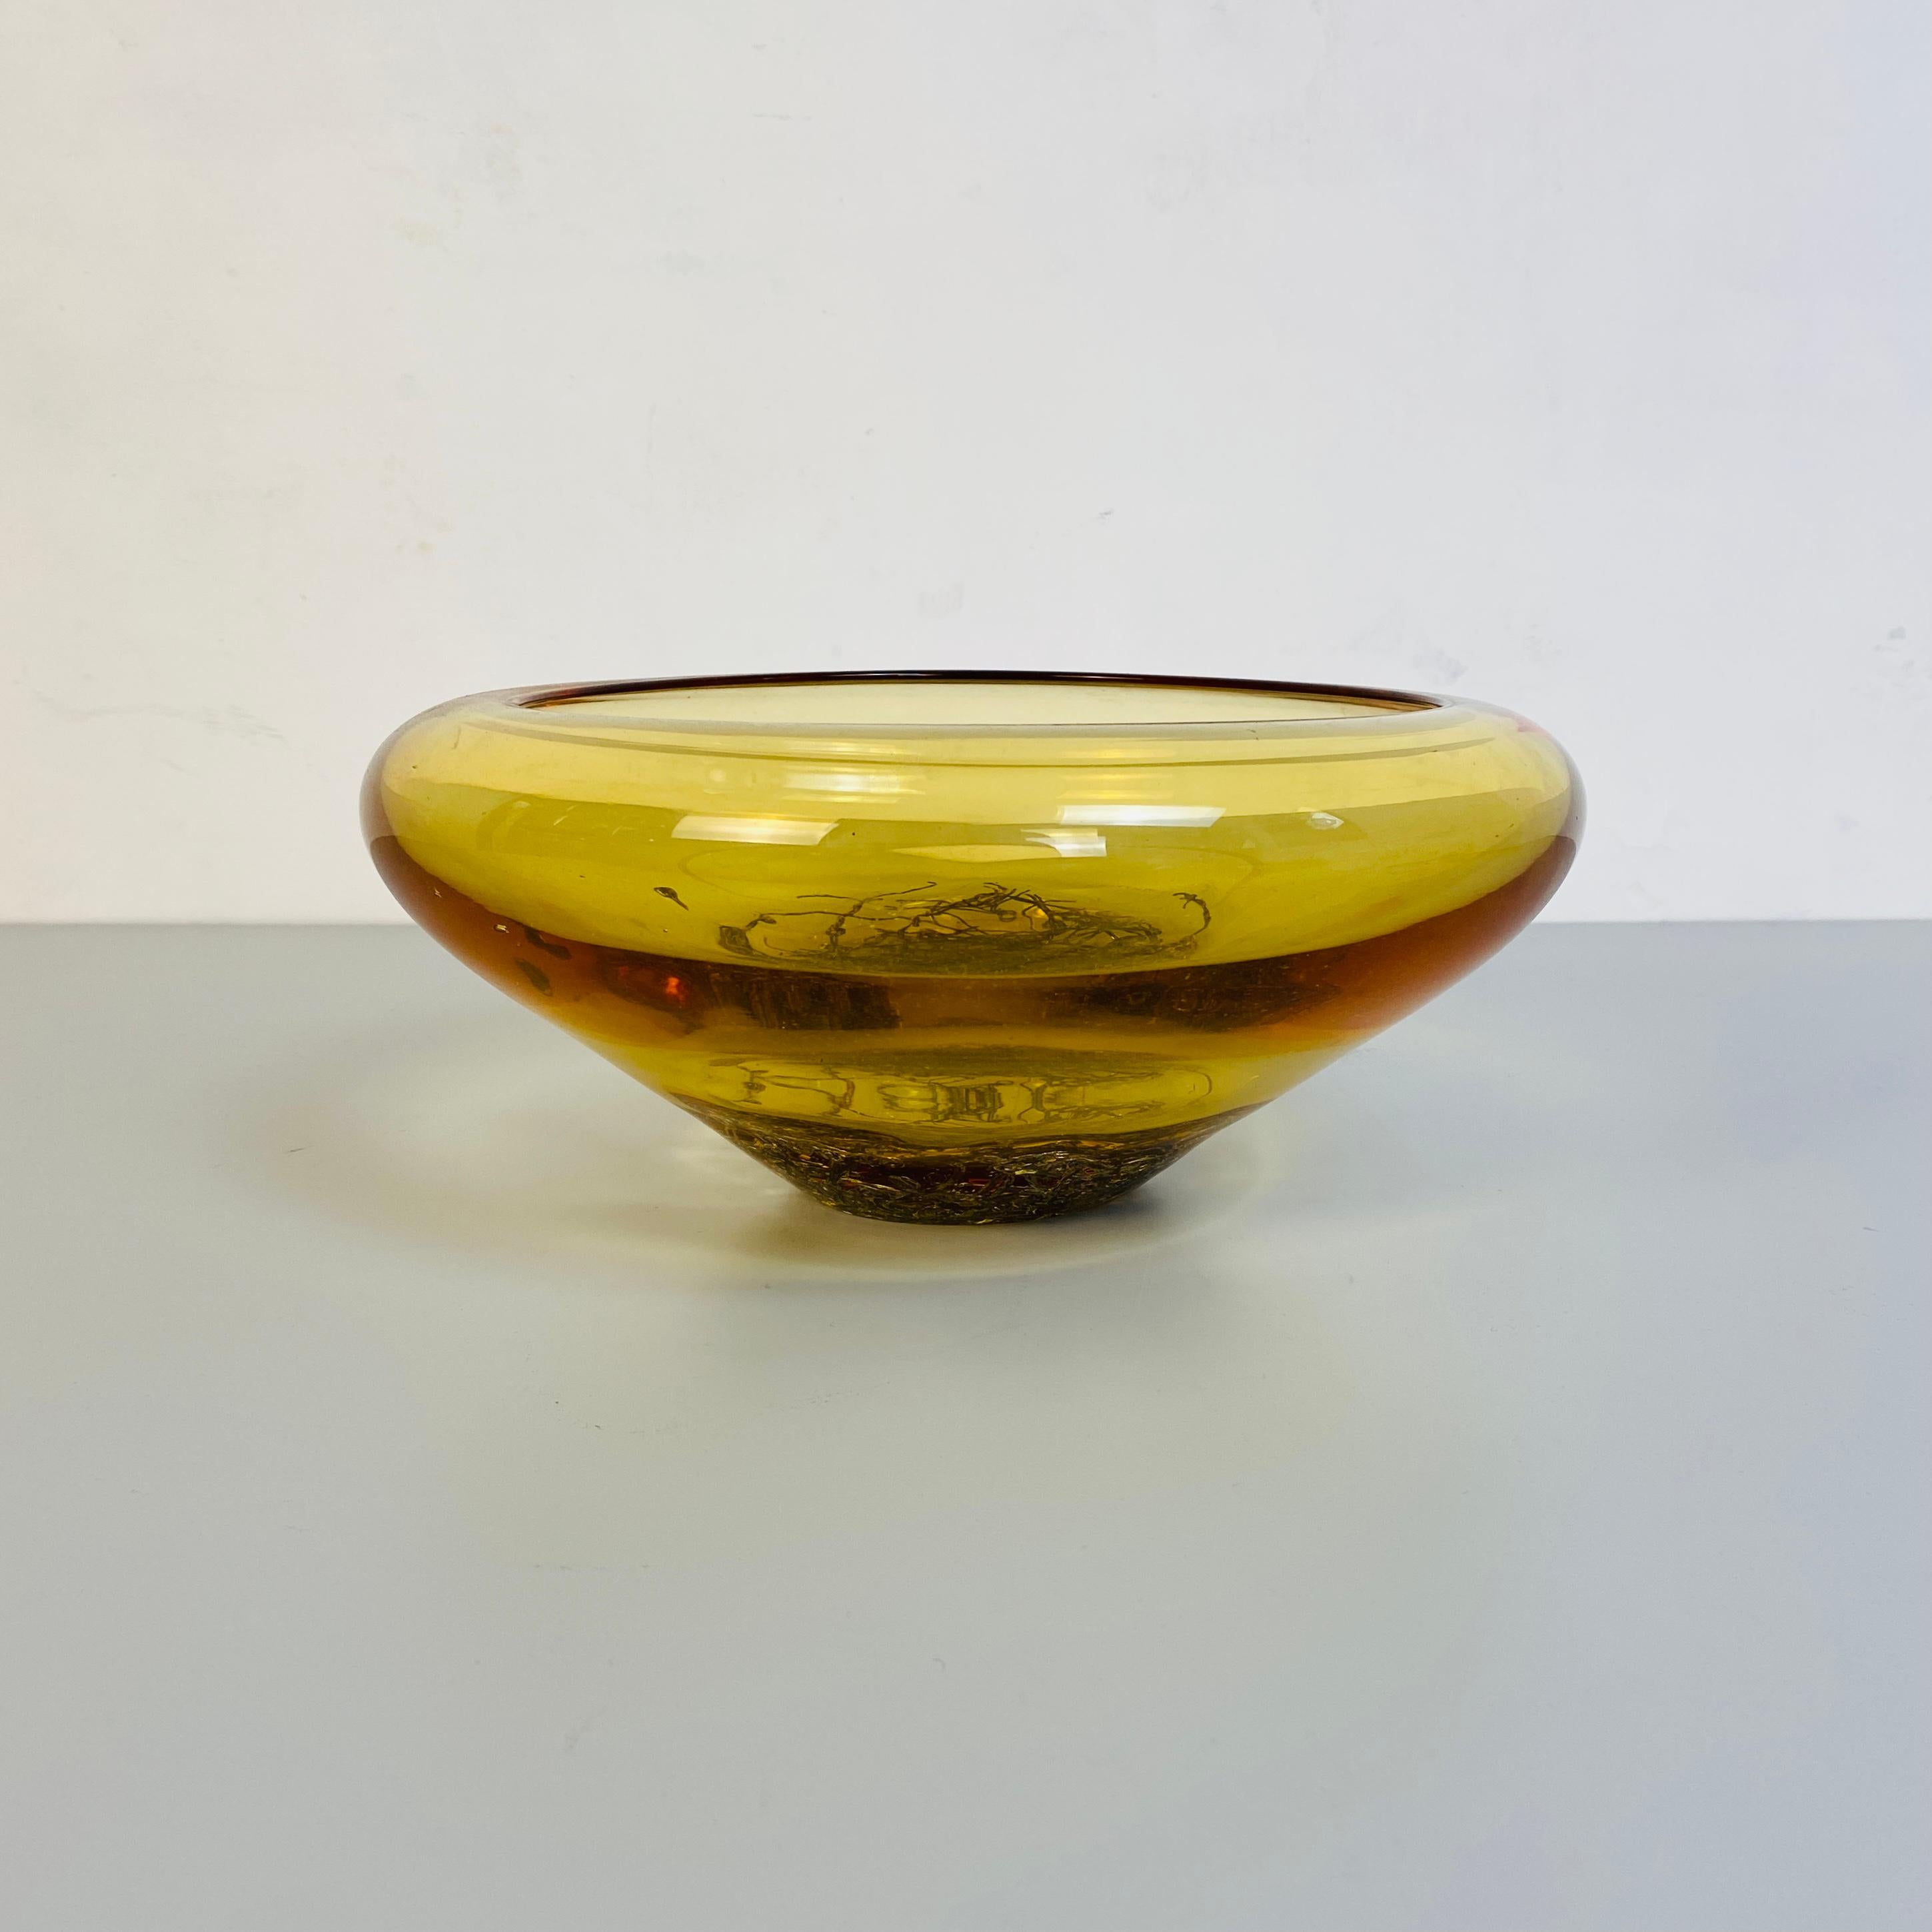 Italian Mid-Century Modern murano glass yellow bowl, 1970s 
Irregular shaped yellow bowl in Murano gold glass with internal metal decoration incorporated within the glass, produced between the 1970s and 1980s period this is perfect in an entrance on